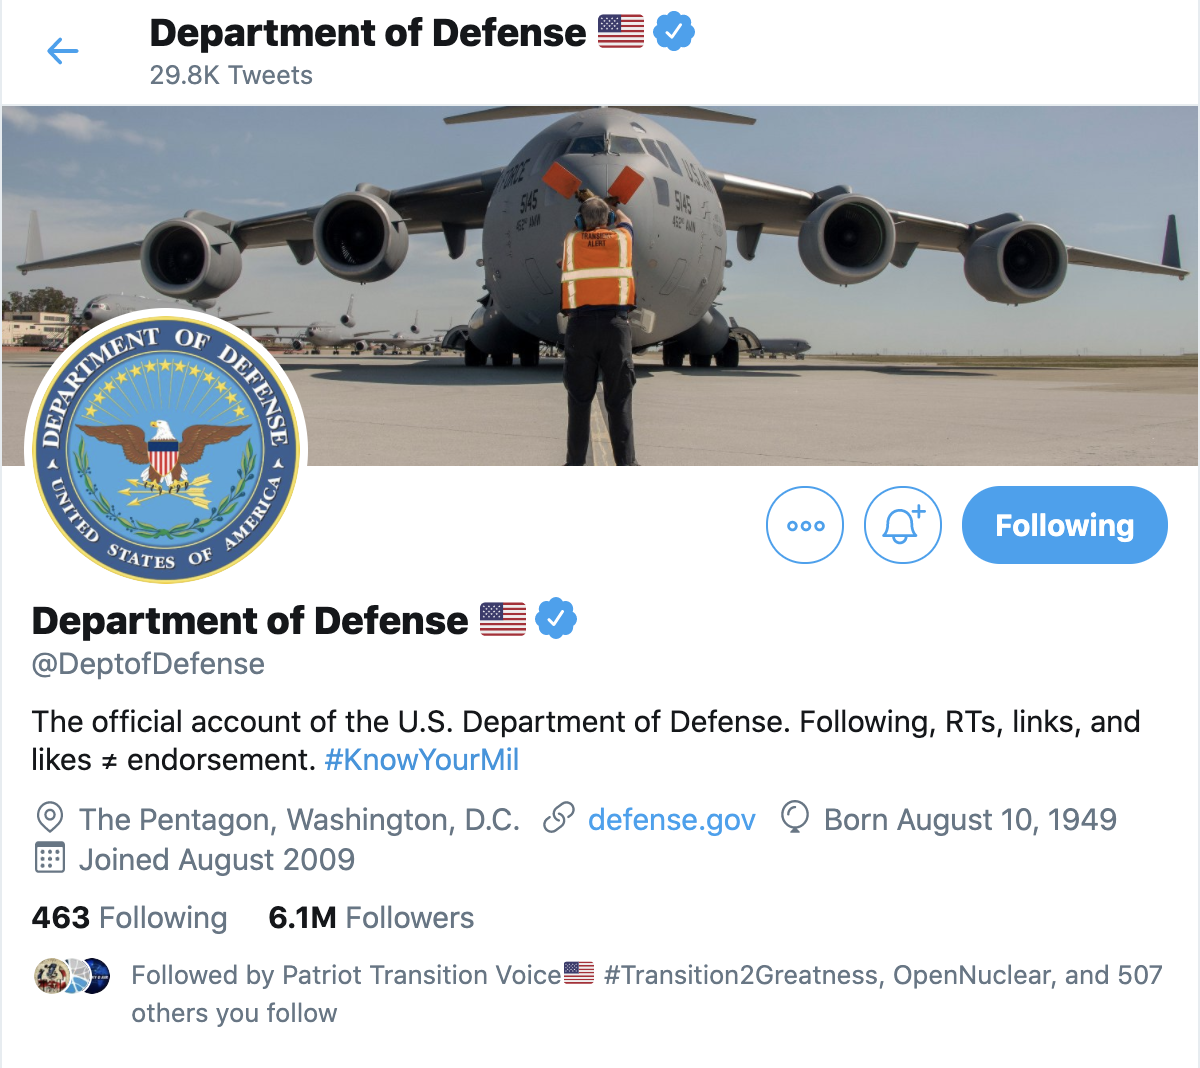 A few more interesting examples of how Twitter is applying the labels in relation to official government accounts. The State Department has been labelled, but the Pentagon has not. The UK Foreign Office has got a label, but the Ministry of Defence has not